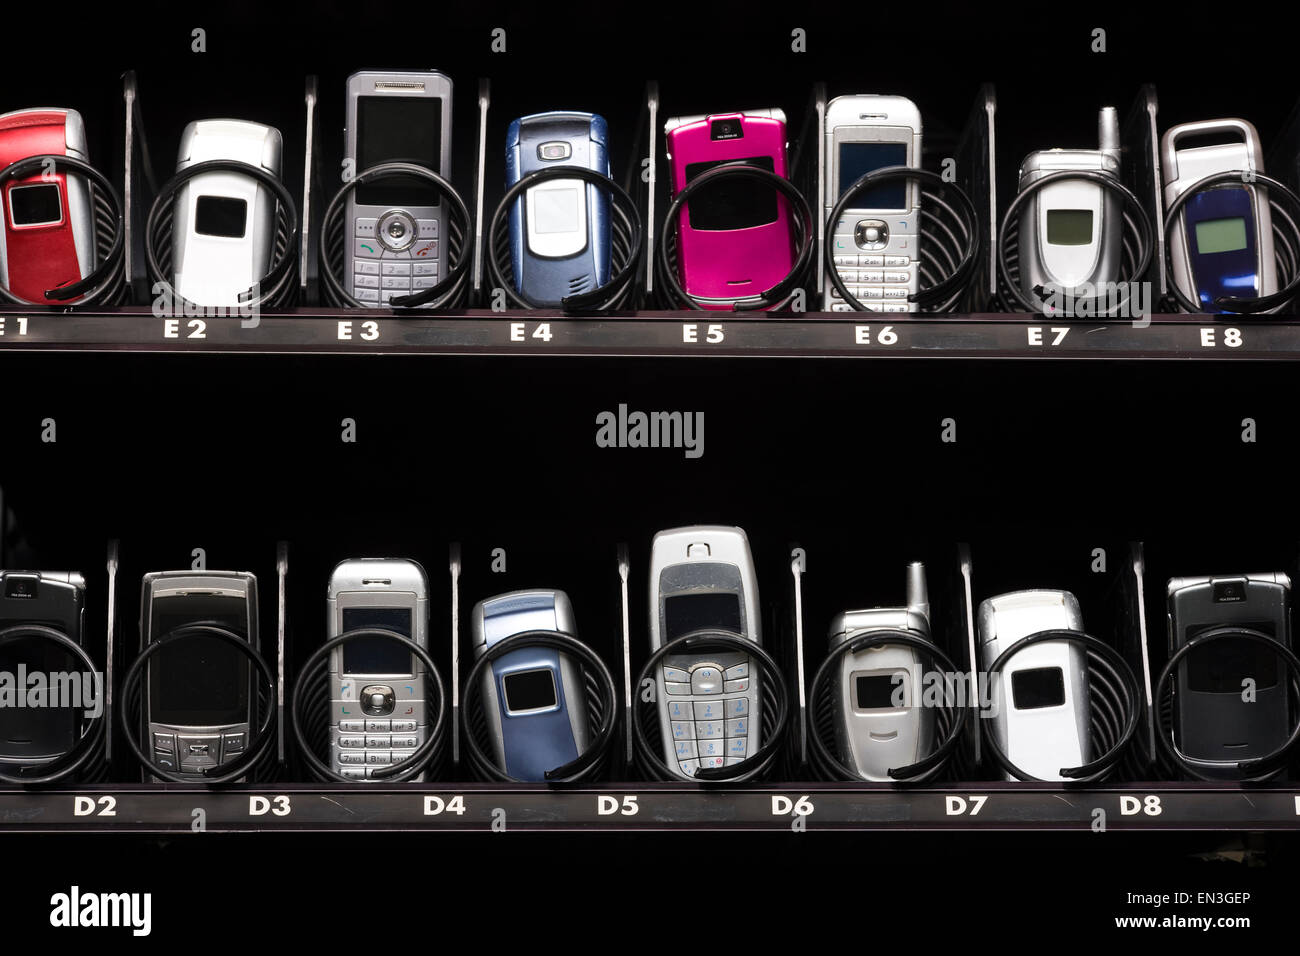 cell phones in a vending machine Stock Photo